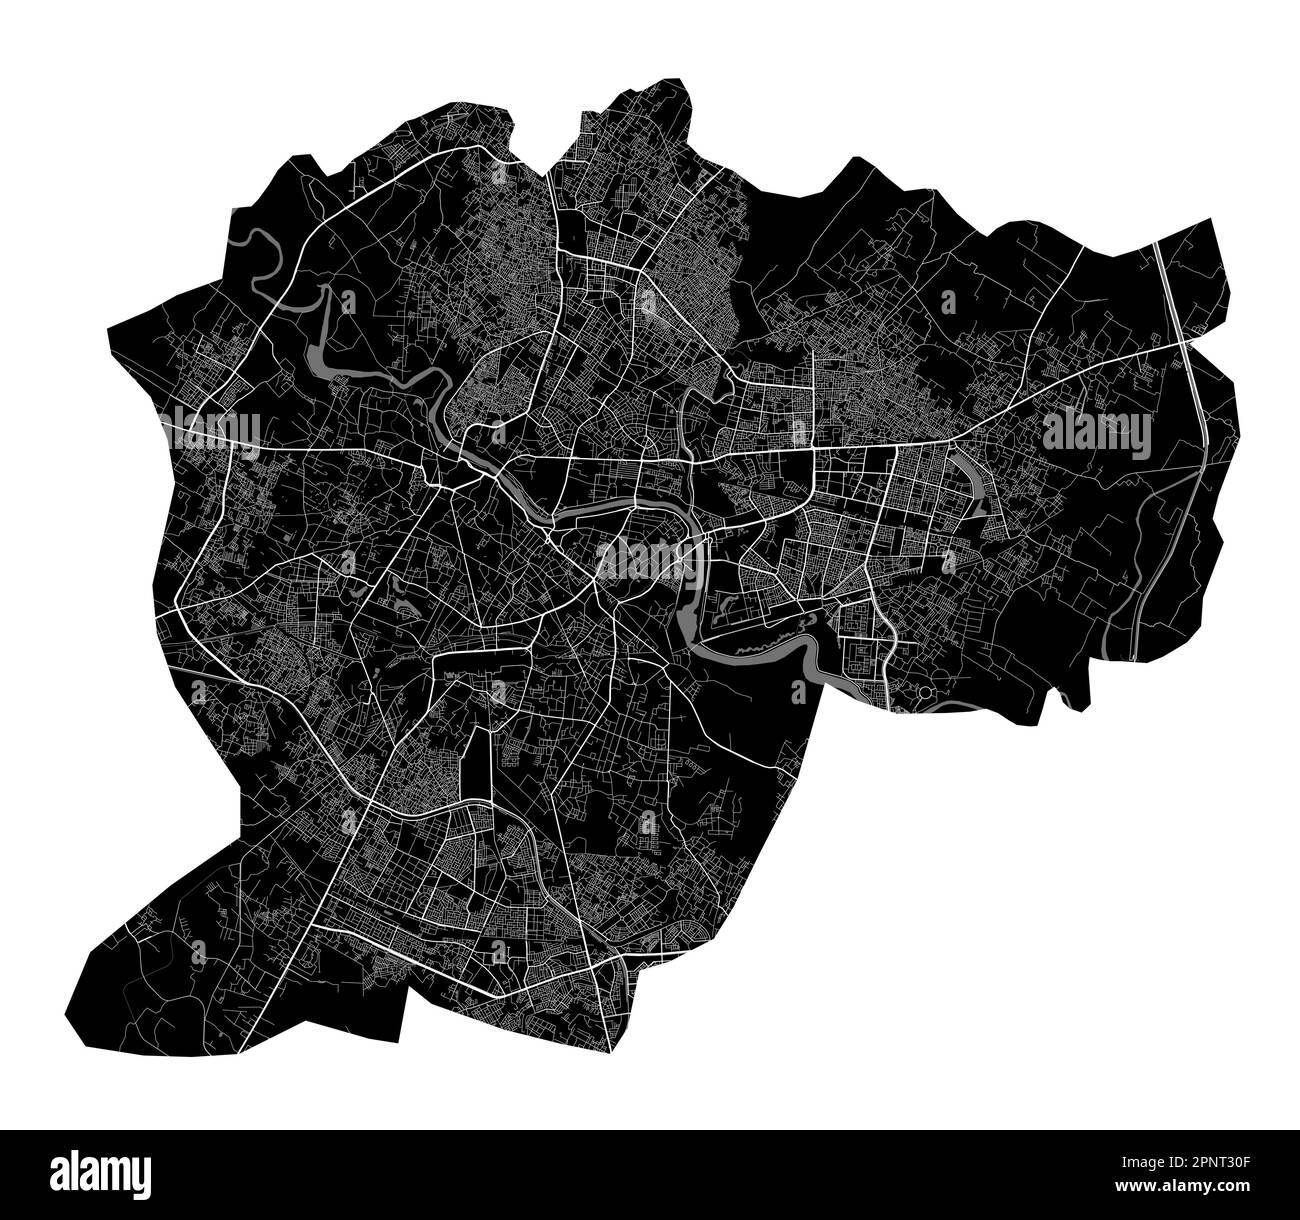 Lucknow map. Detailed vector map of Lucknow city administrative area. Cityscape poster metropolitan aria view. Black land with white roads and avenues Stock Vector